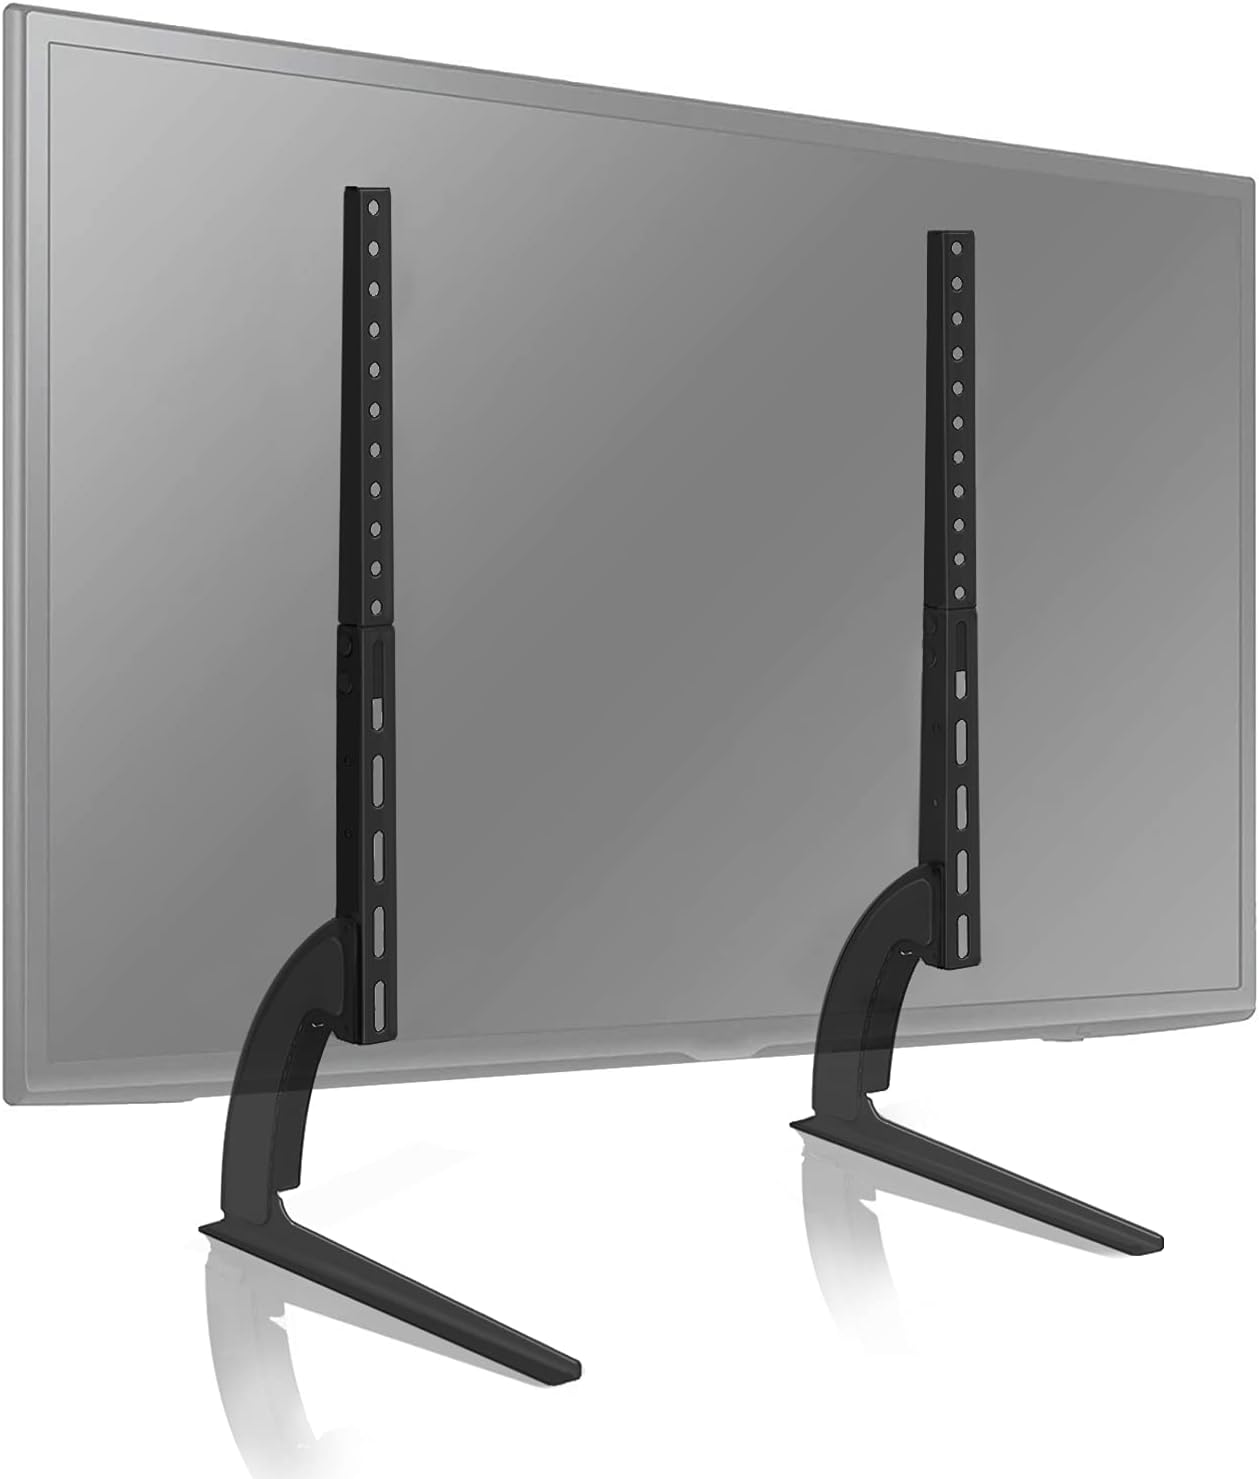 TV legs were easy to install and keeps the tv sturdy. We used them on a 65 TV.